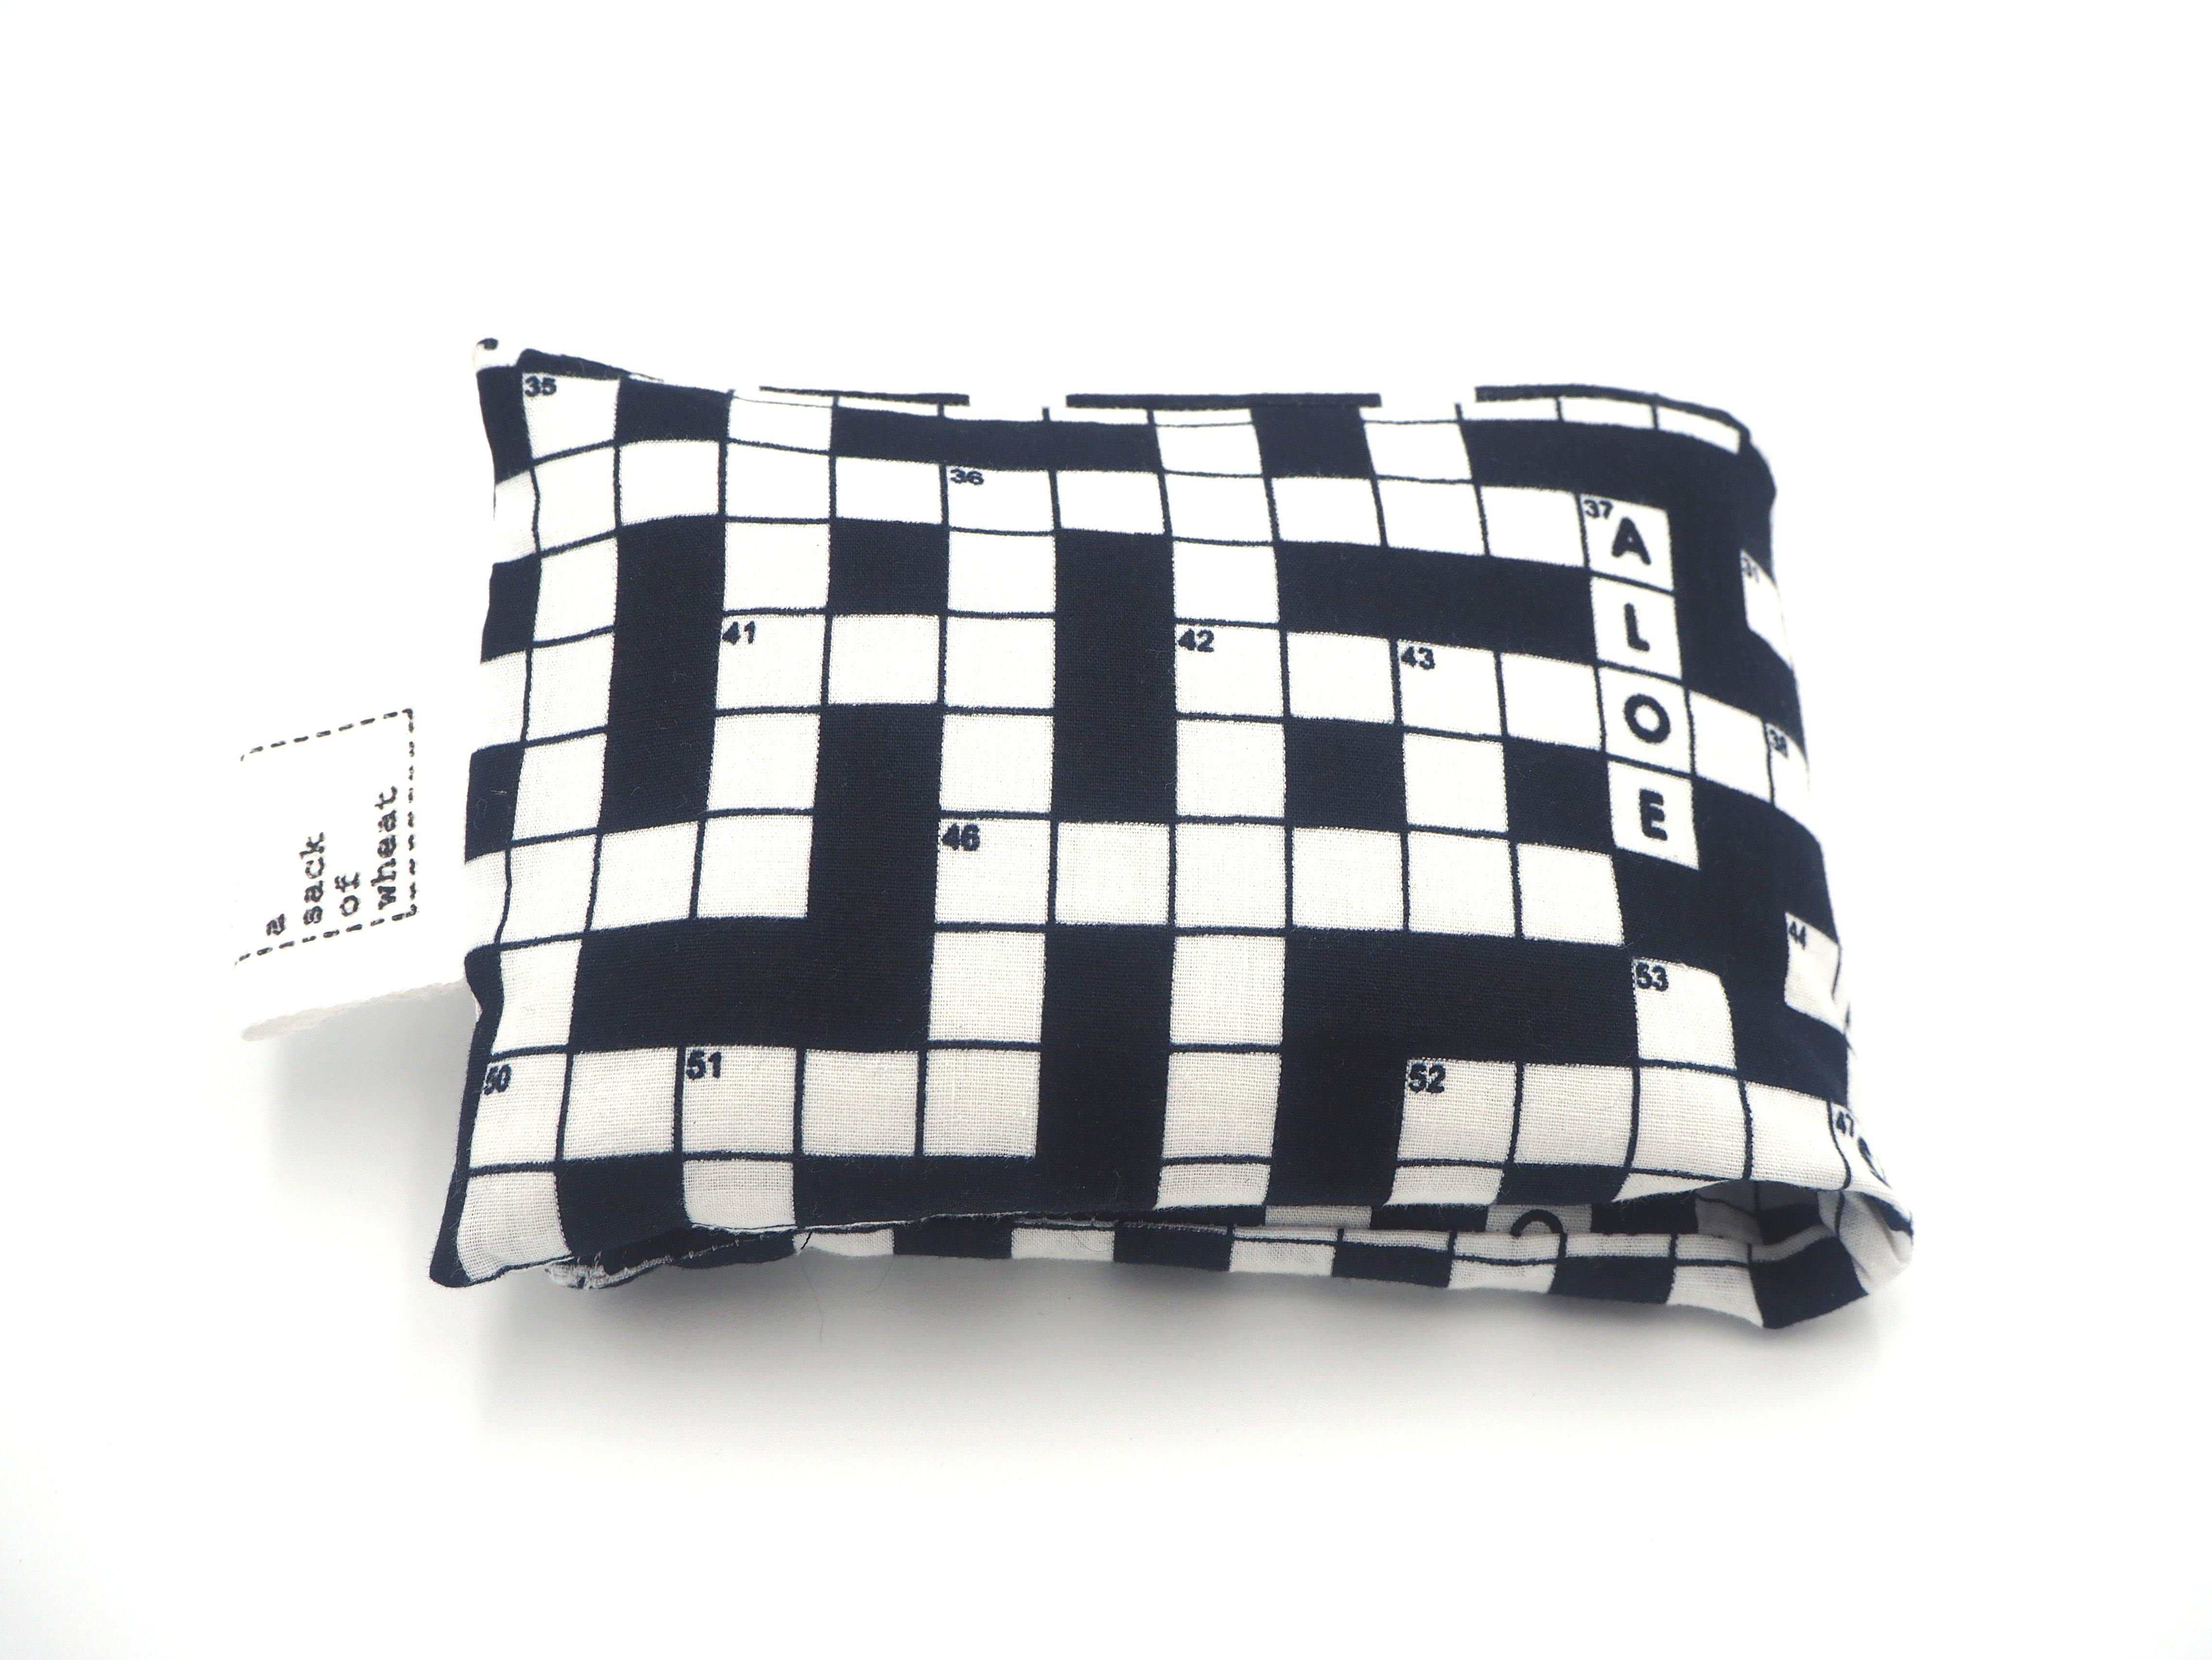 Folded view of A Sack Of Wheat, in 'a one of a kind', Crossword Puzzle print, 100% cotton fabric